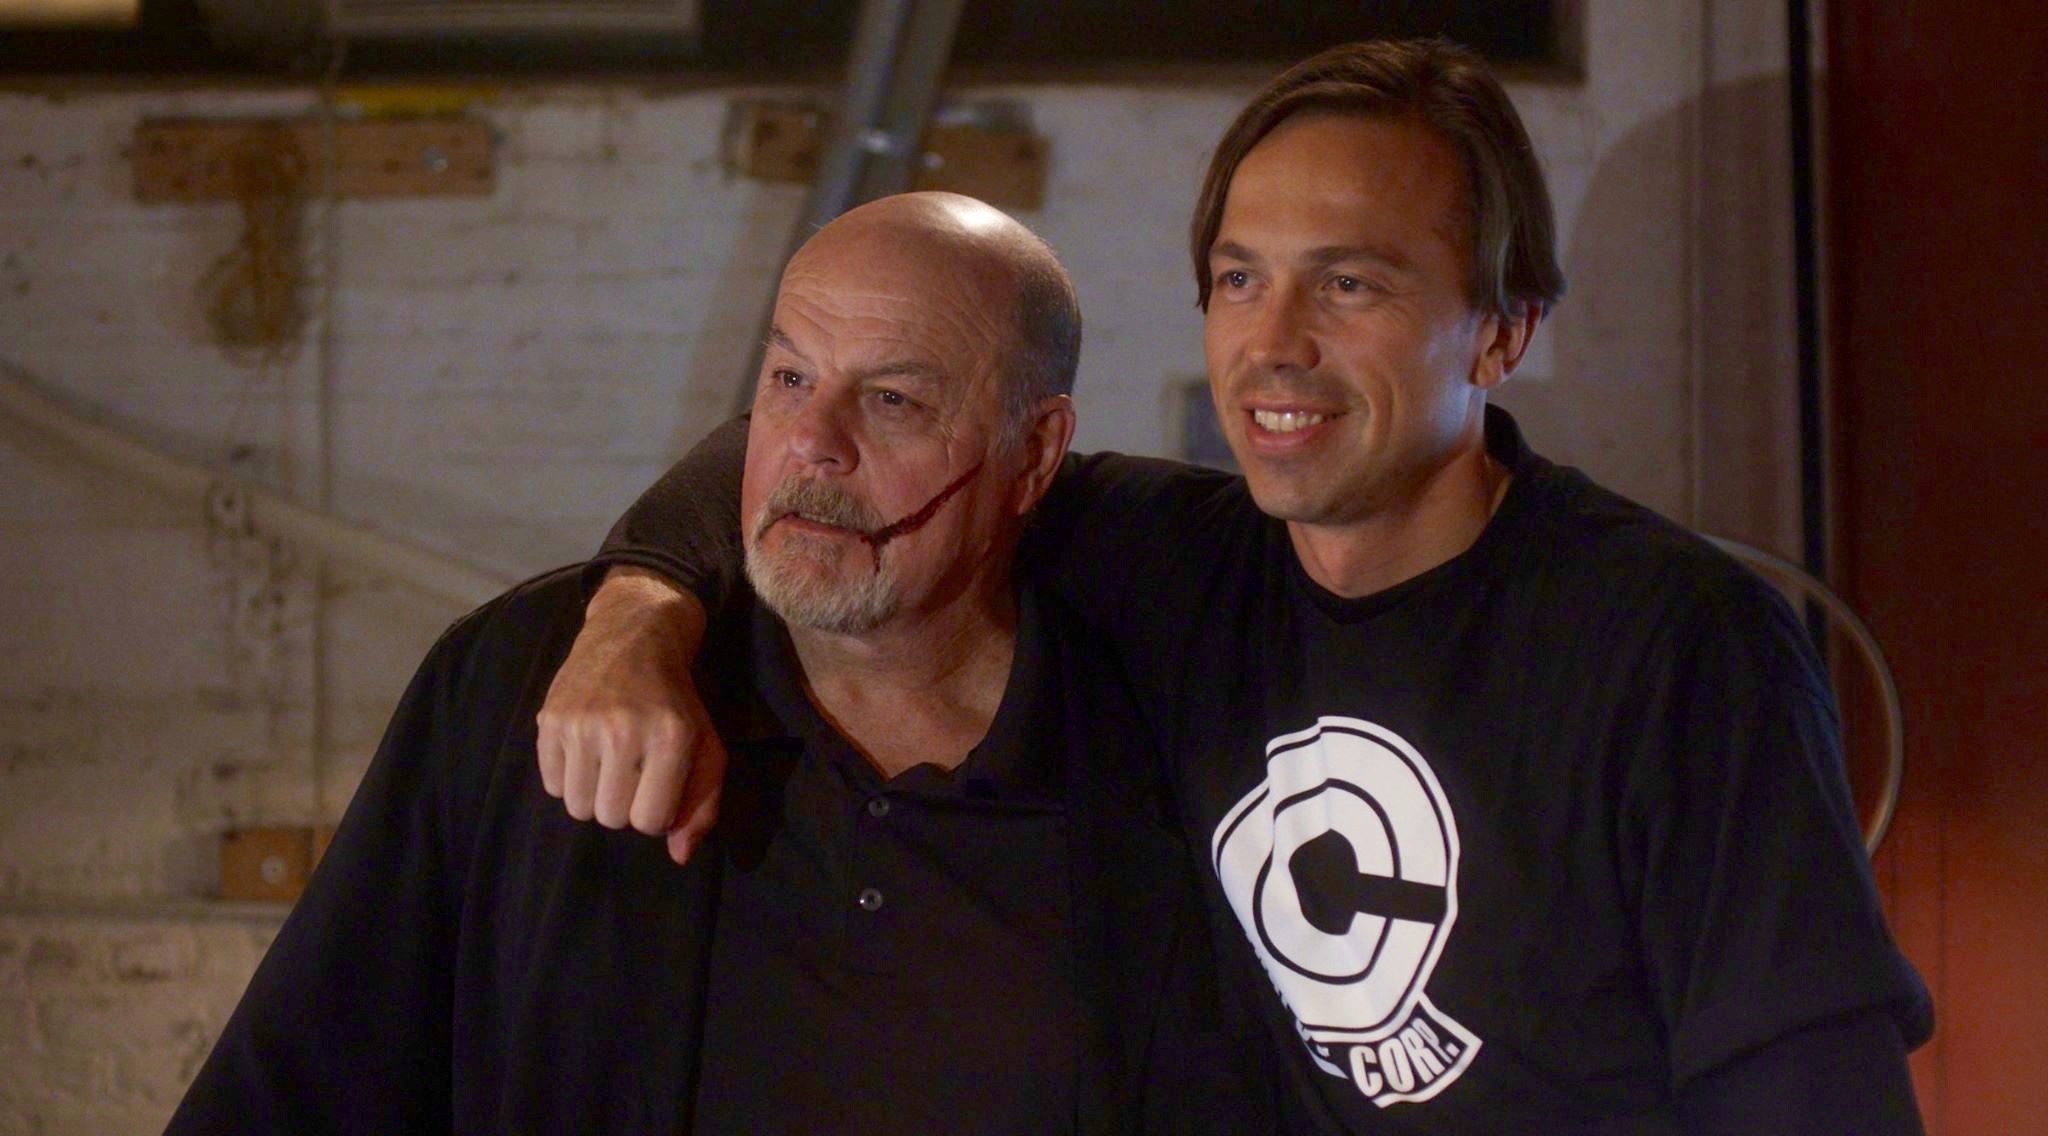 Michael Ironside and Serge Levin on the set of Abysm.